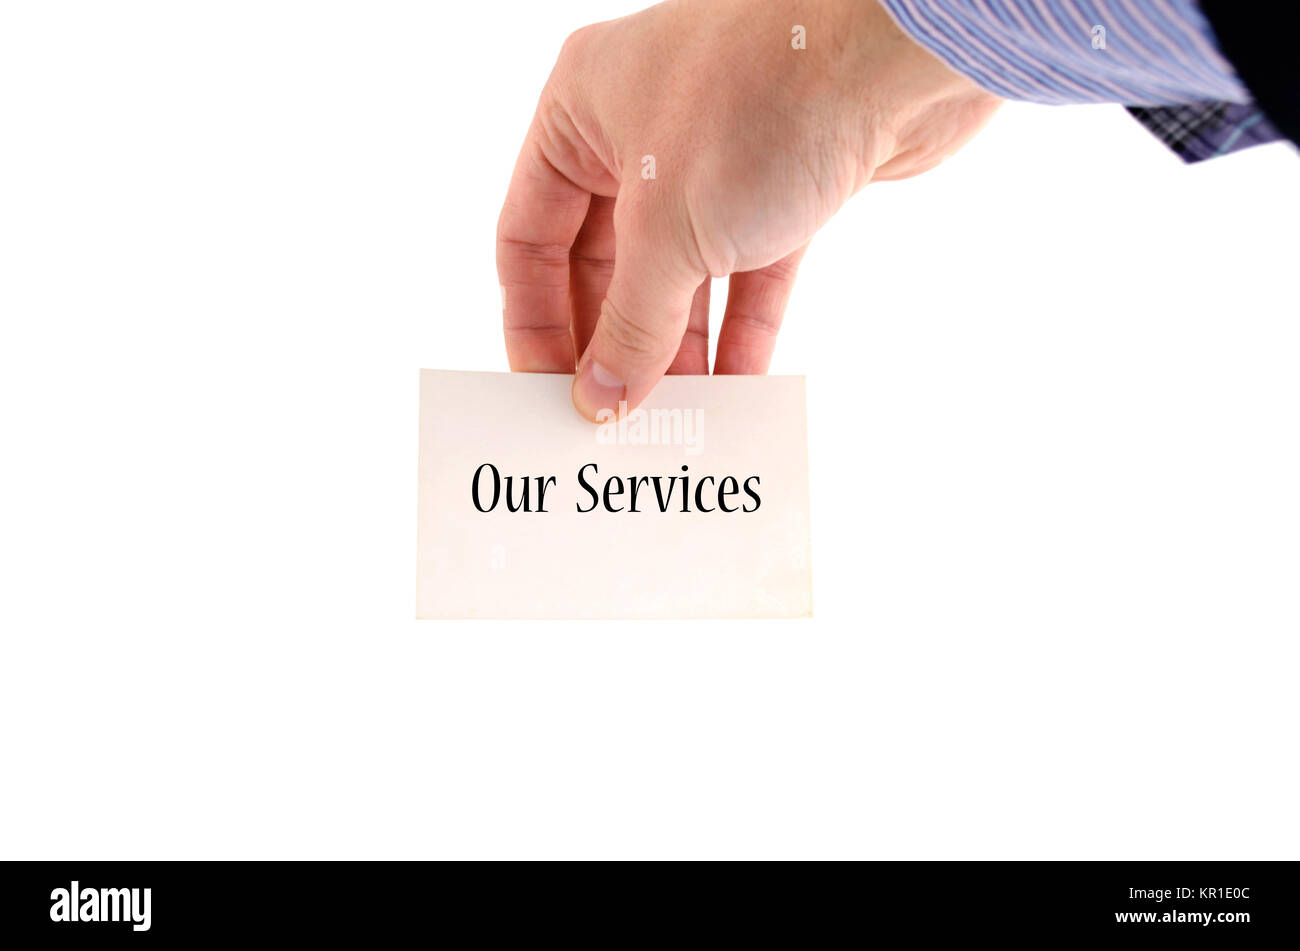 Our services text concept Stock Photo